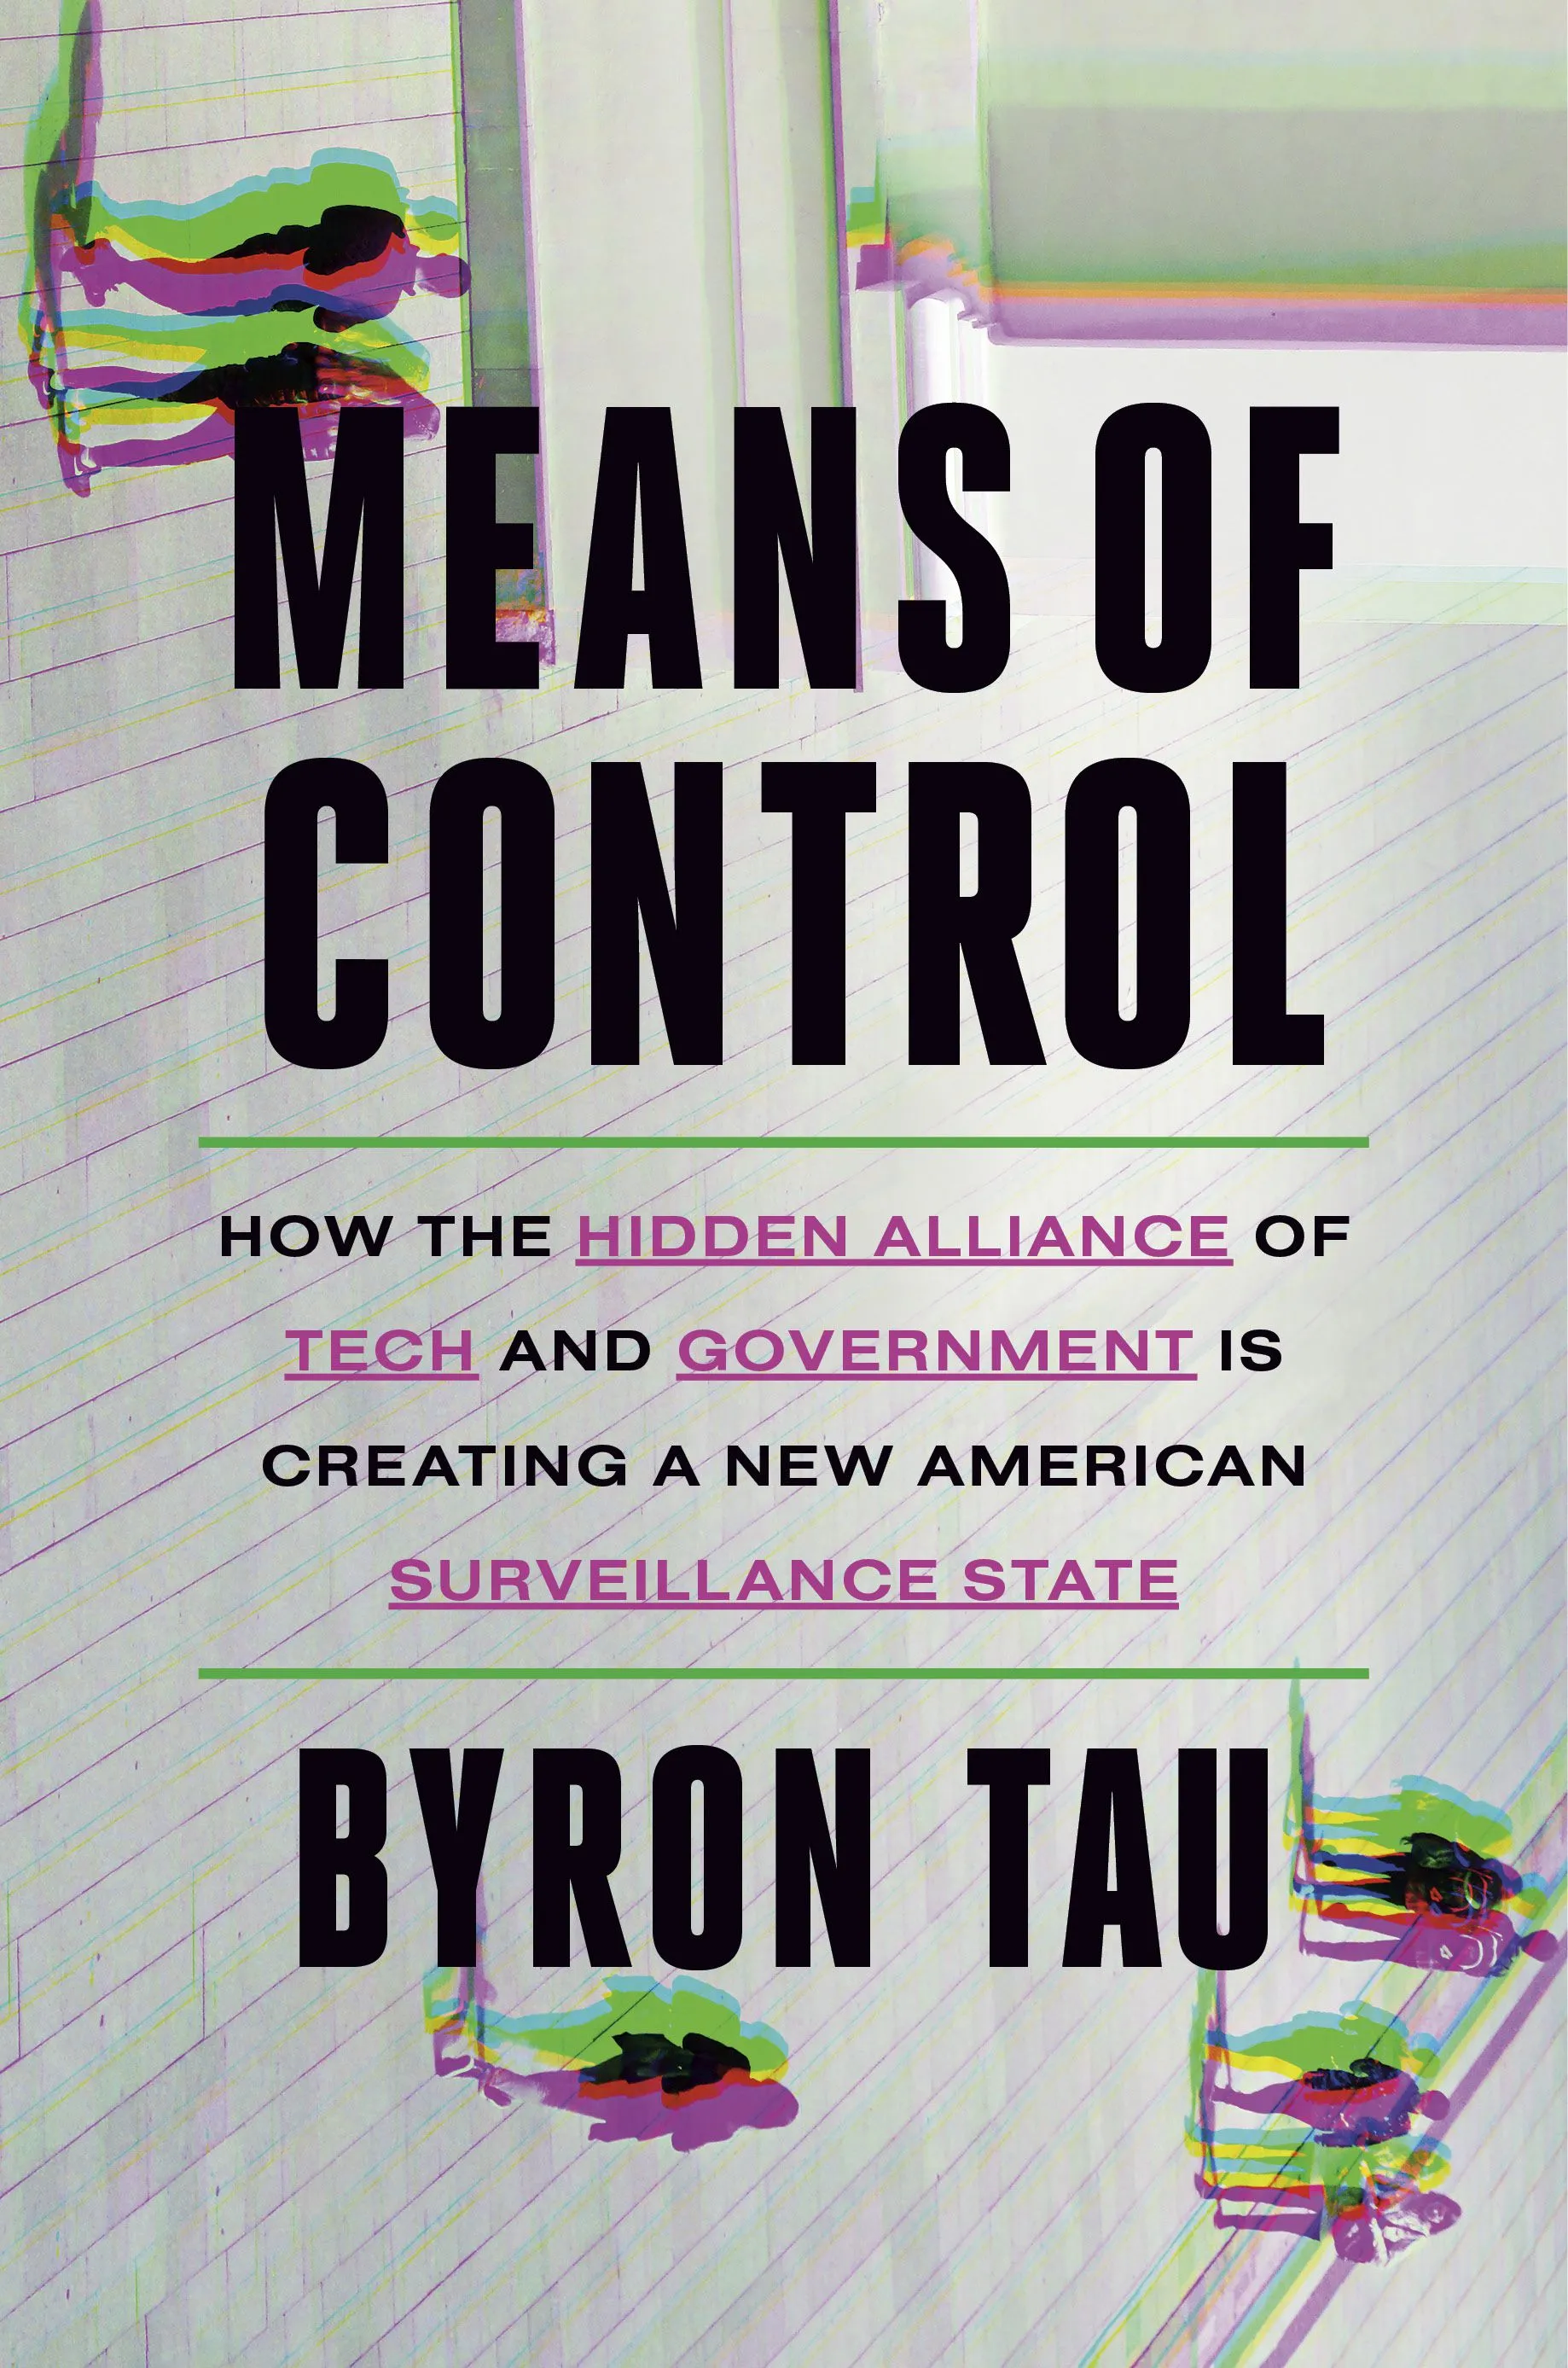 A cover image of the book titled Means of Control